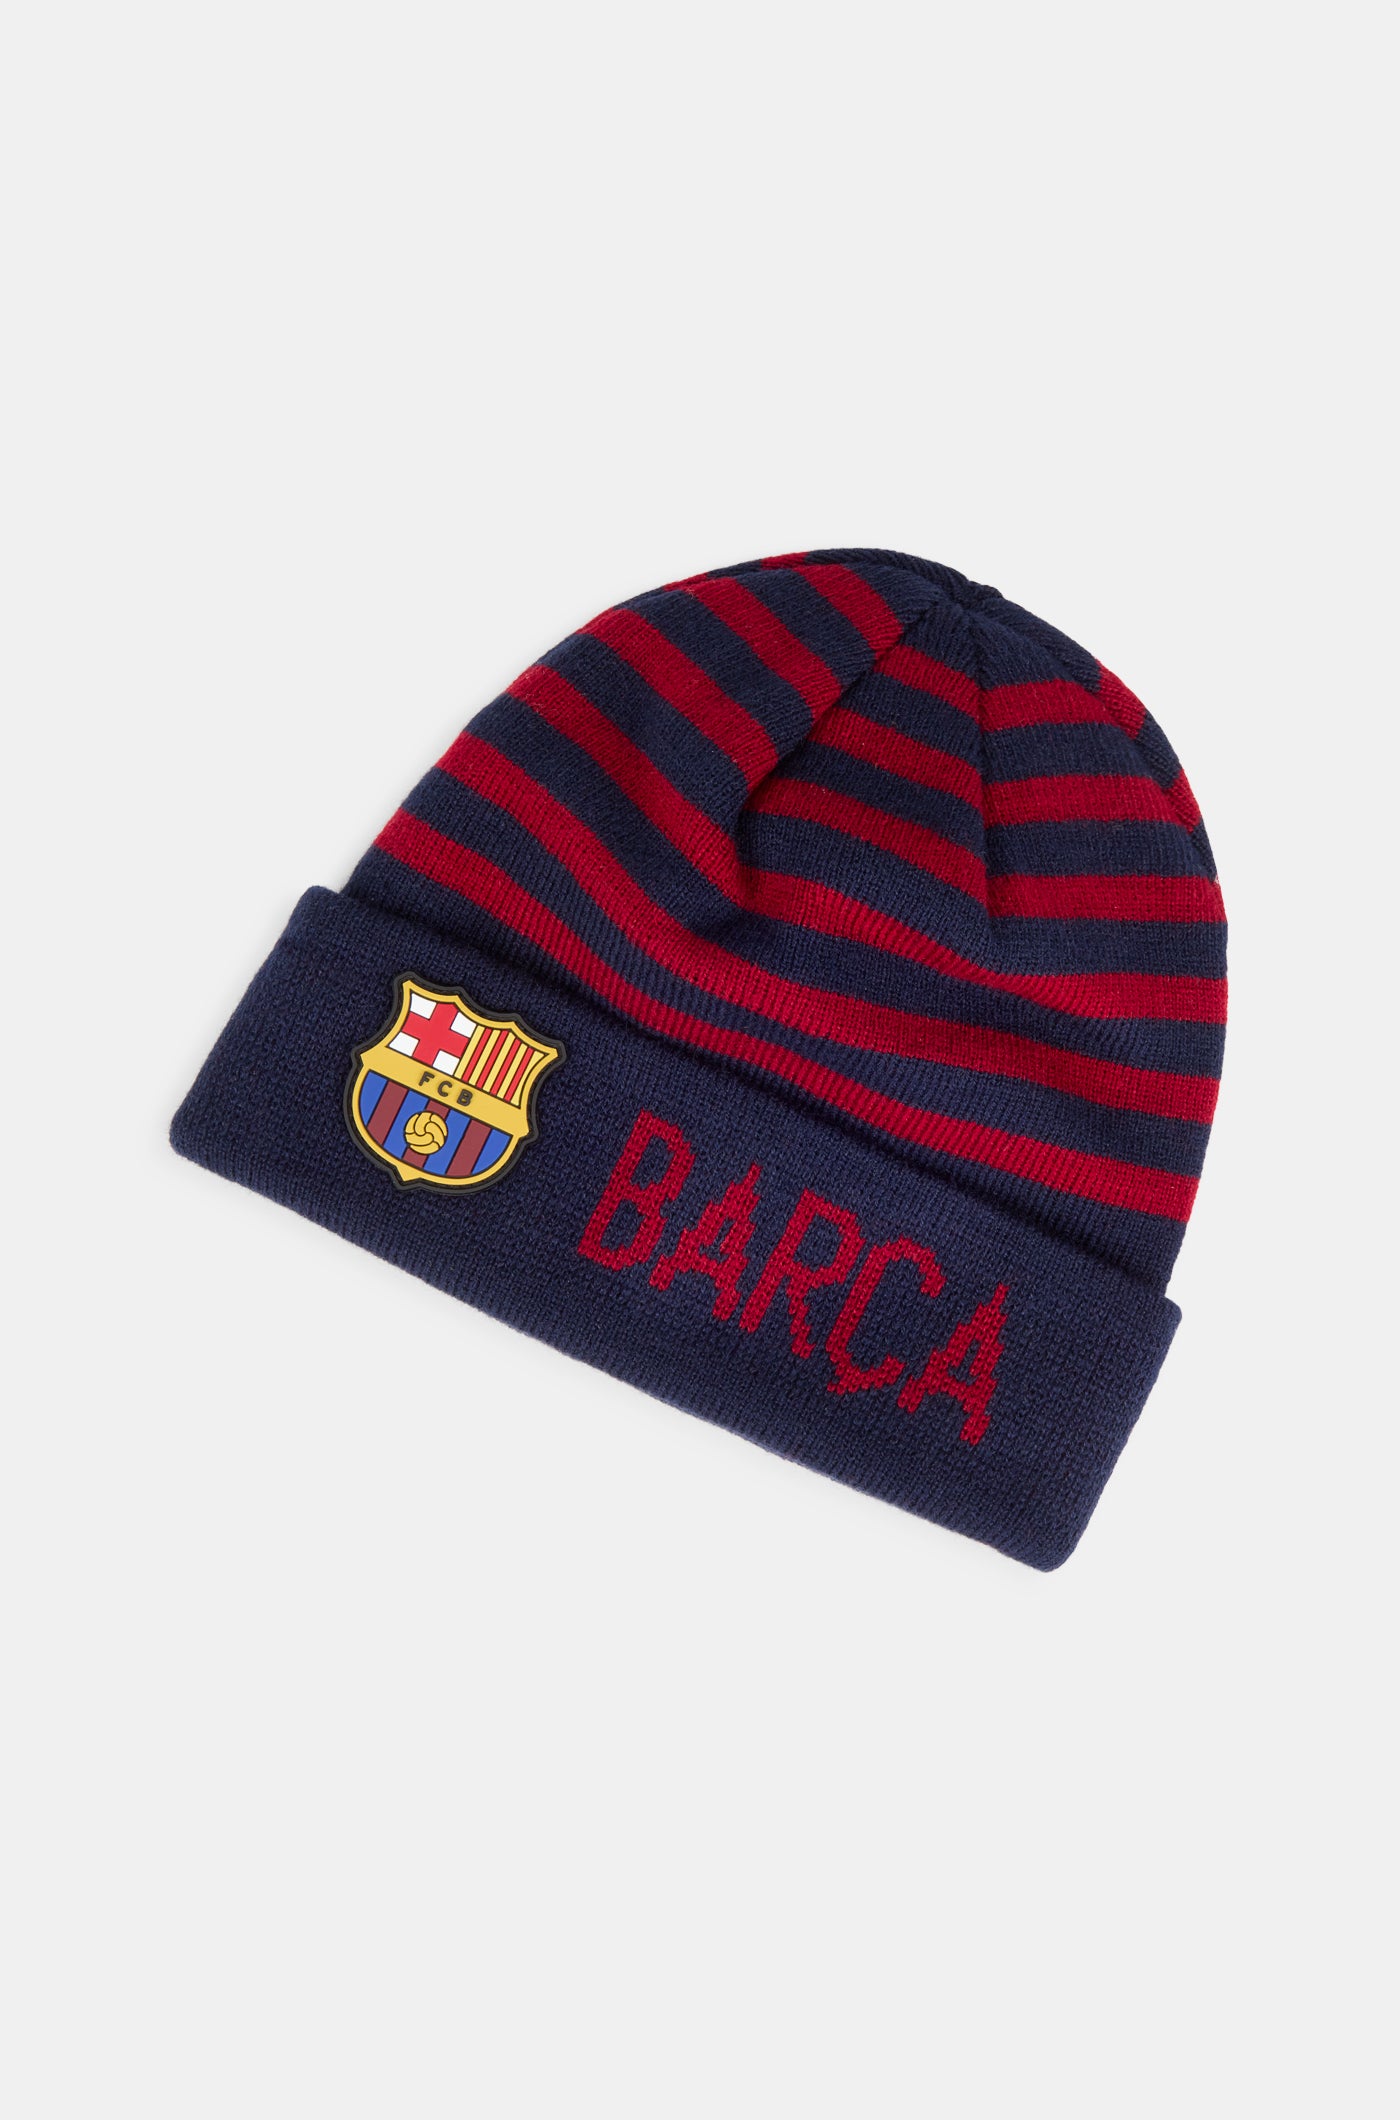 FC Barcelona knitted cap with crest